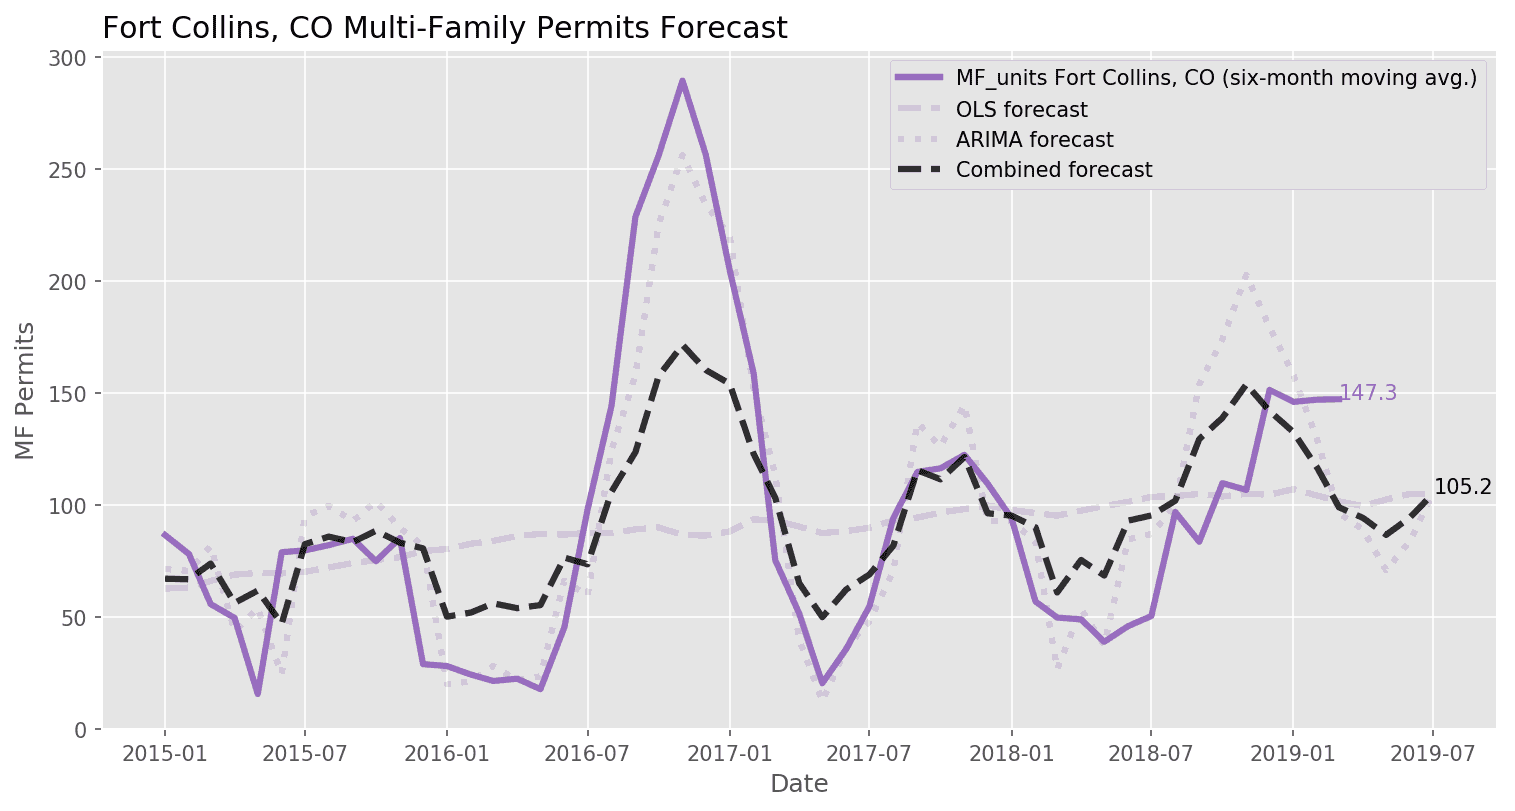 Fort Collins, CO Multi-Family Permit Forecasts_April, 2019